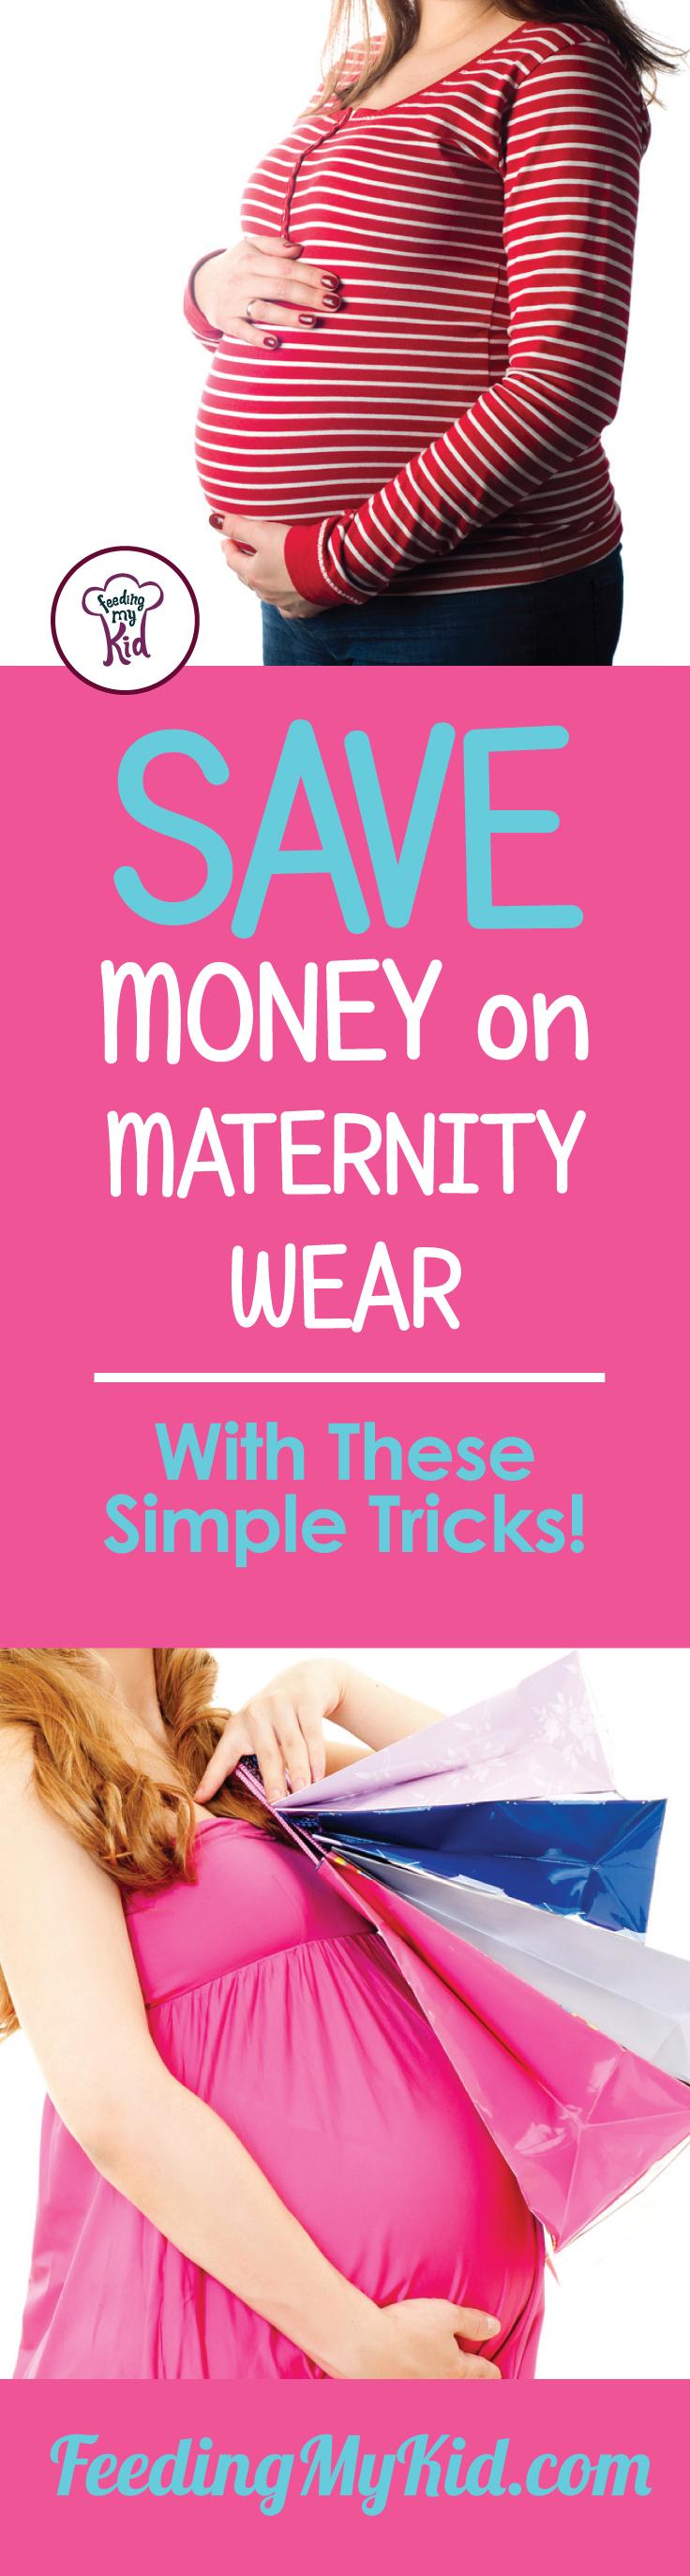 Maternity Wear Tips And Tricks